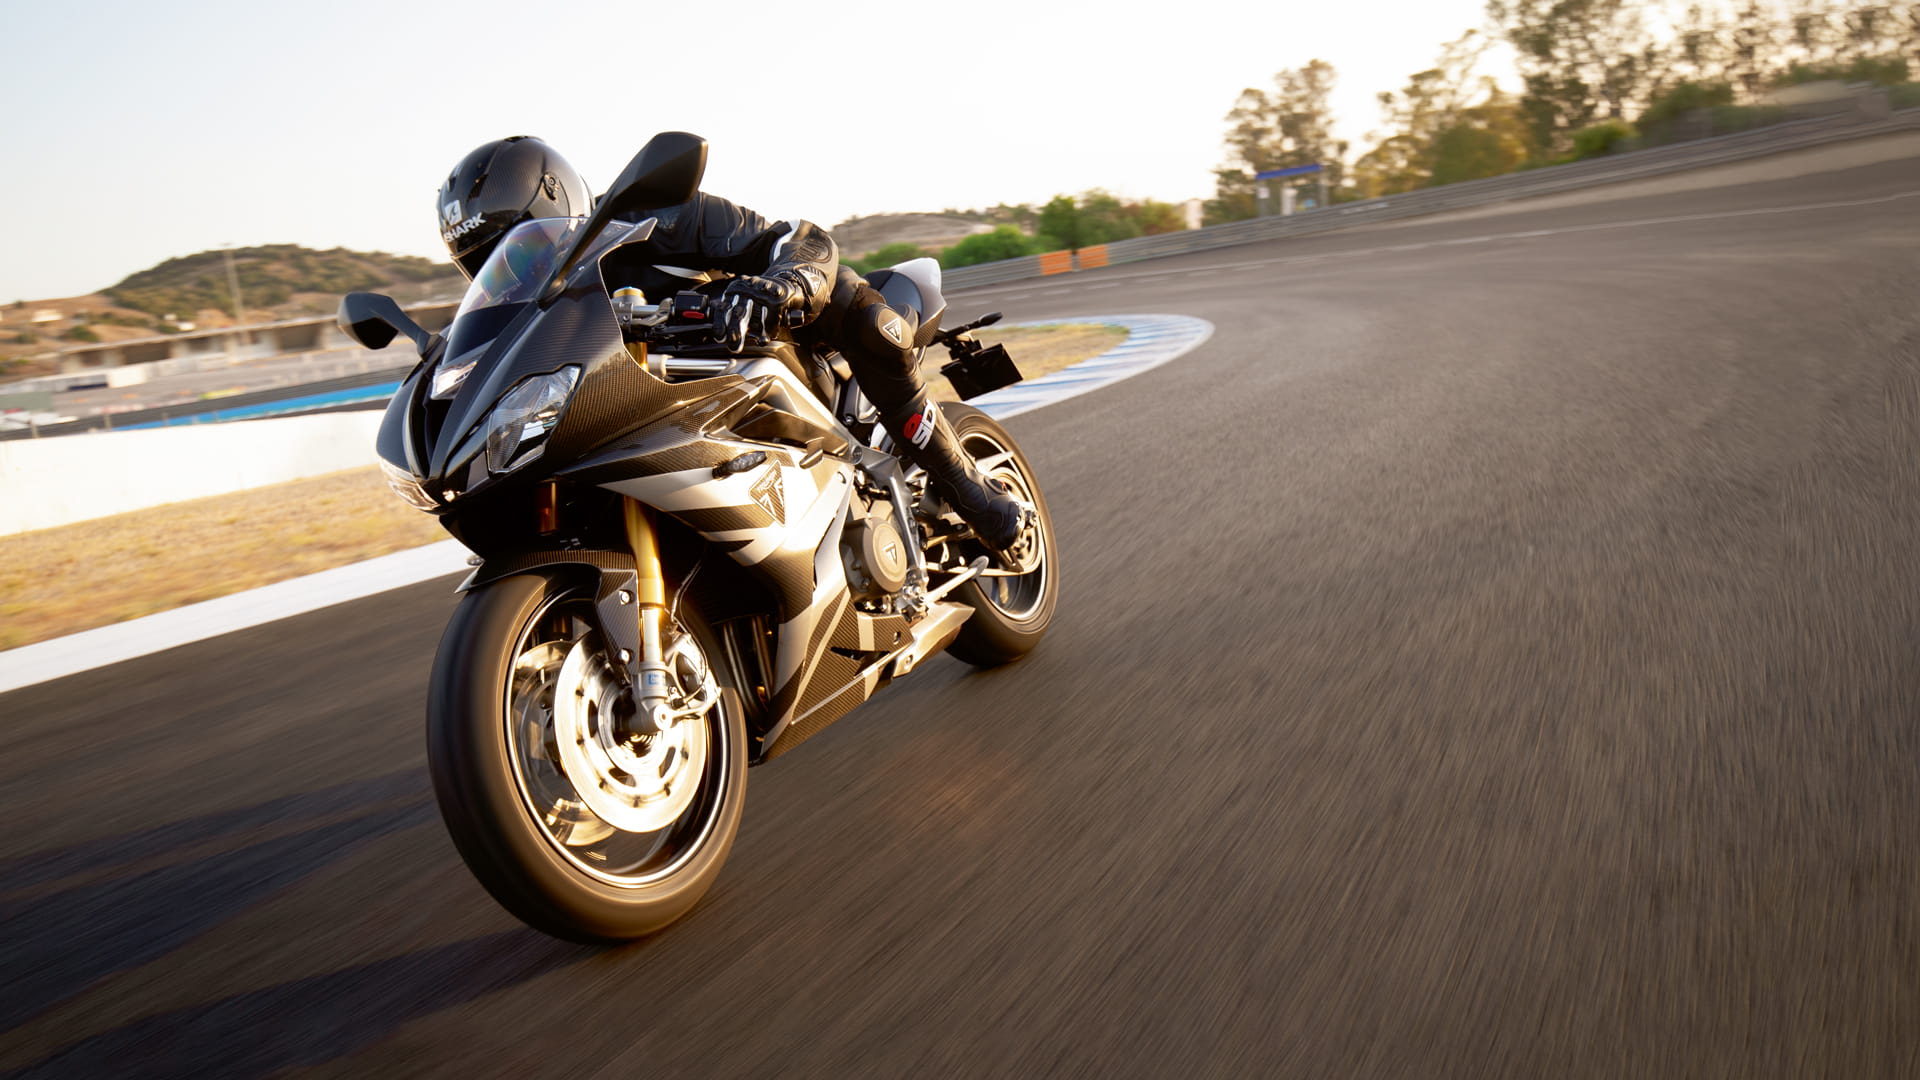 Triumph Daytona Moto2TM 765 motorcycle (EU and Asia Edition) racing around a race track at speed